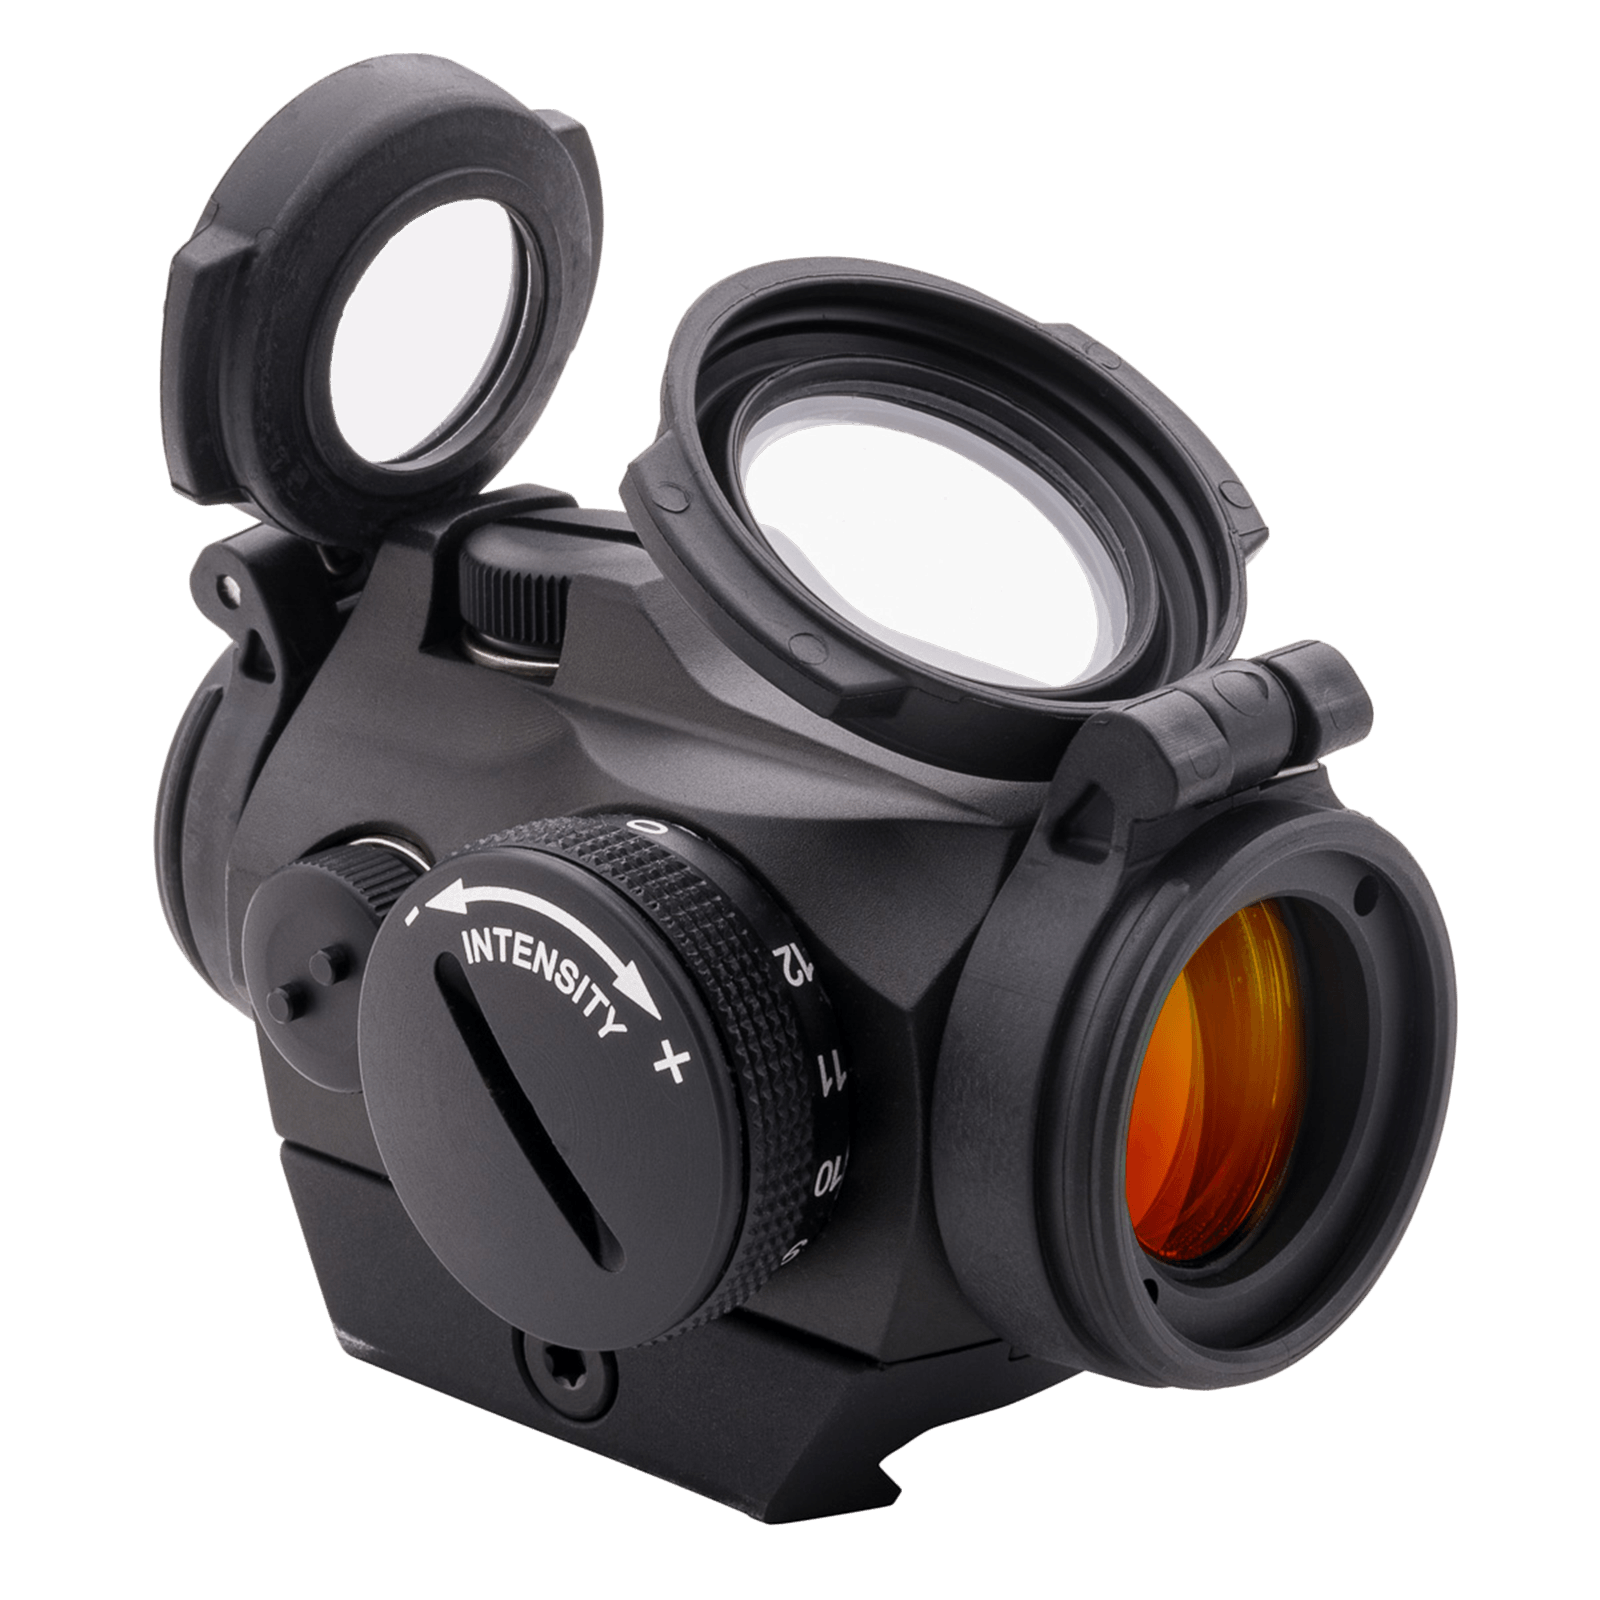 Aimpoint Micro H-2 Red dot sight 2 MOA